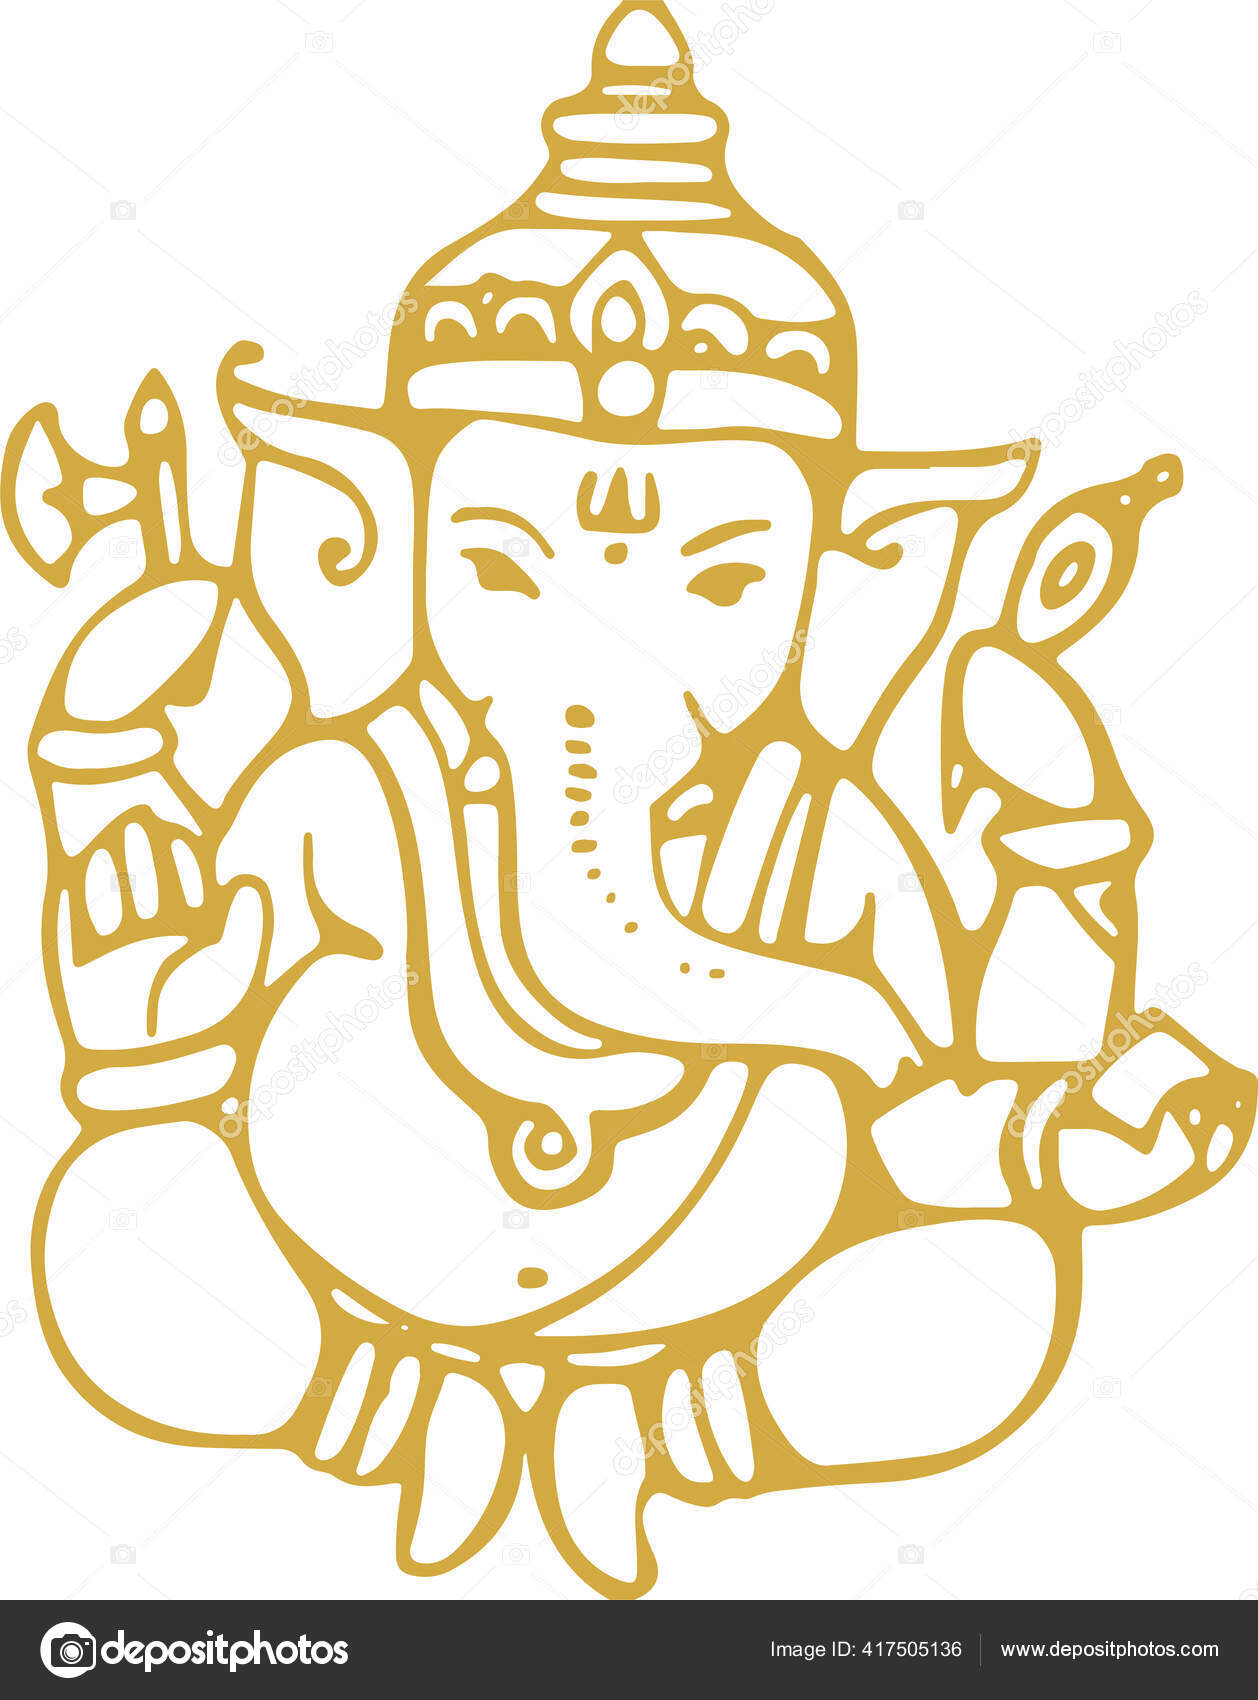 11 Symbolic Meanings Of Ganesha That Will Change Your Perspective Of Him  Ganesha  drawing Ganesh art paintings Lord ganesha paintings